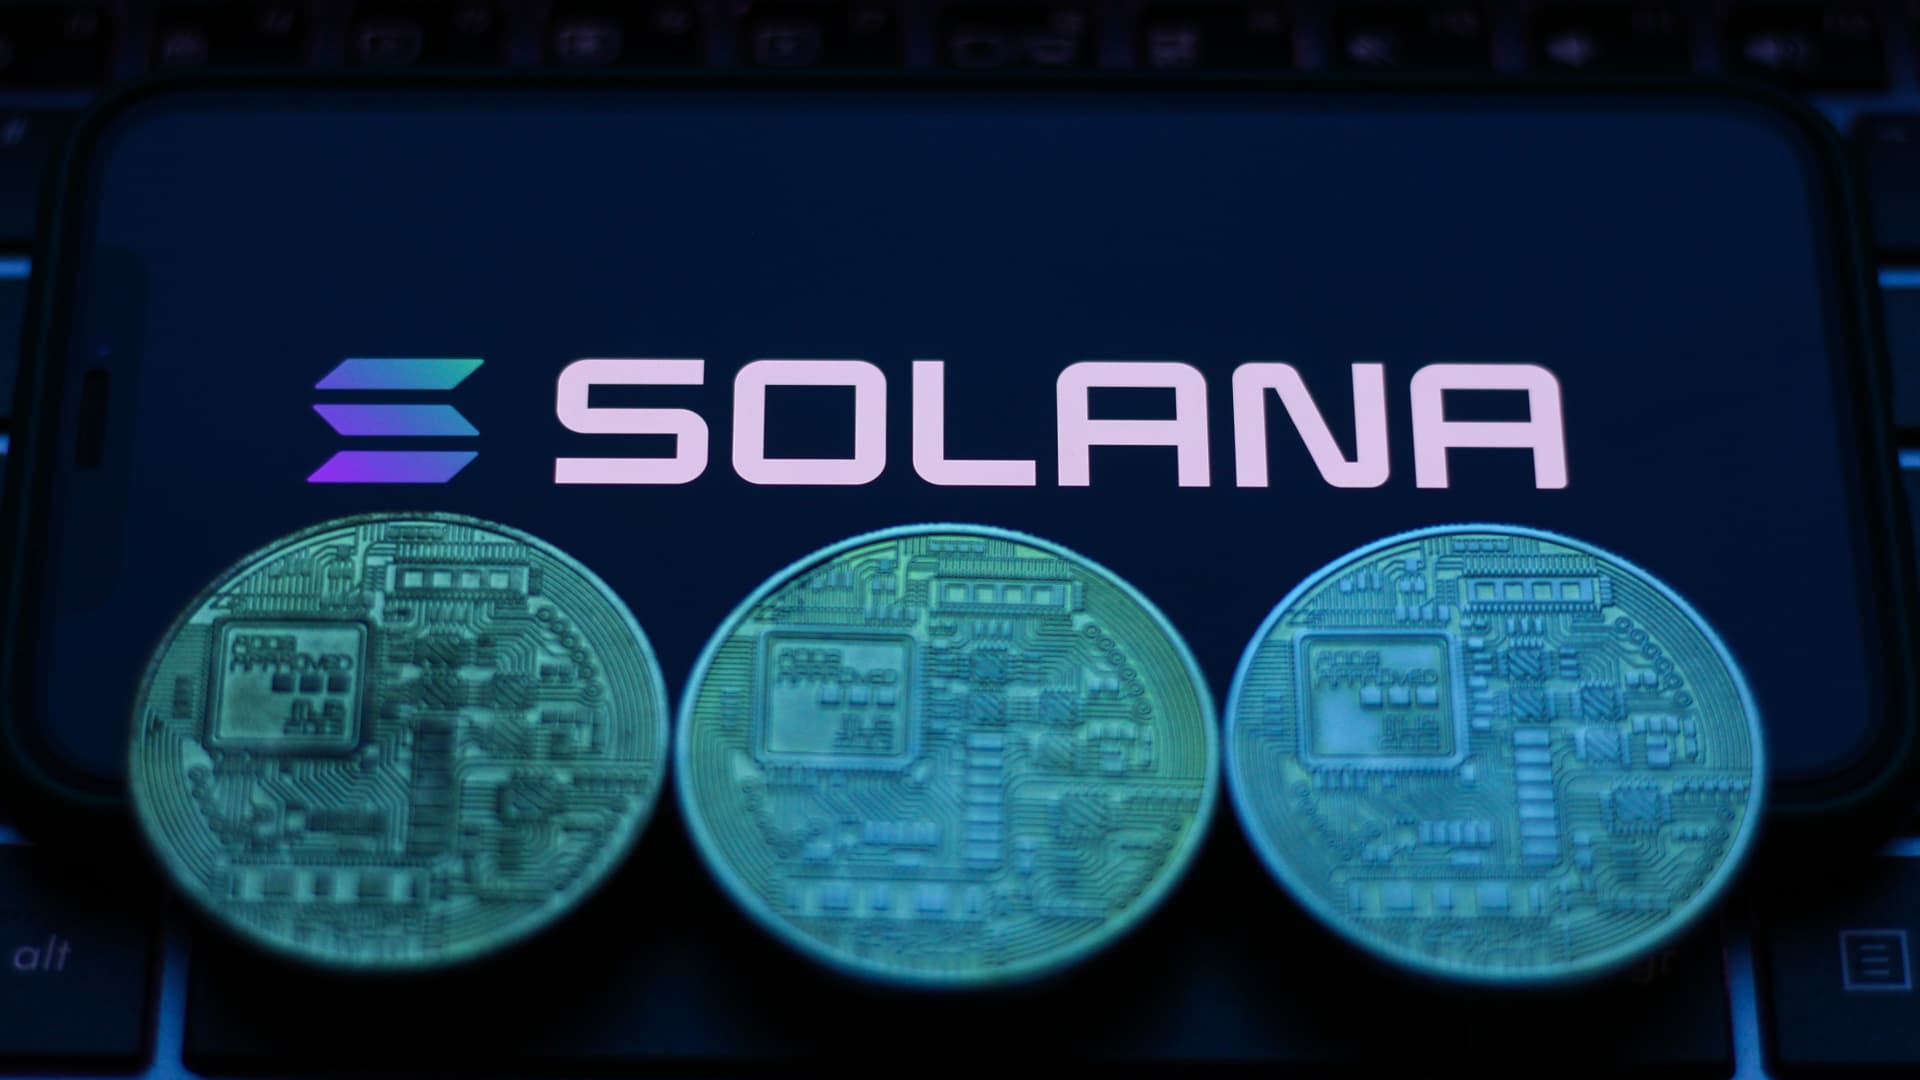 Ongoing solana attack targets thousands of crypto wallets, costing users more than $5 million so far